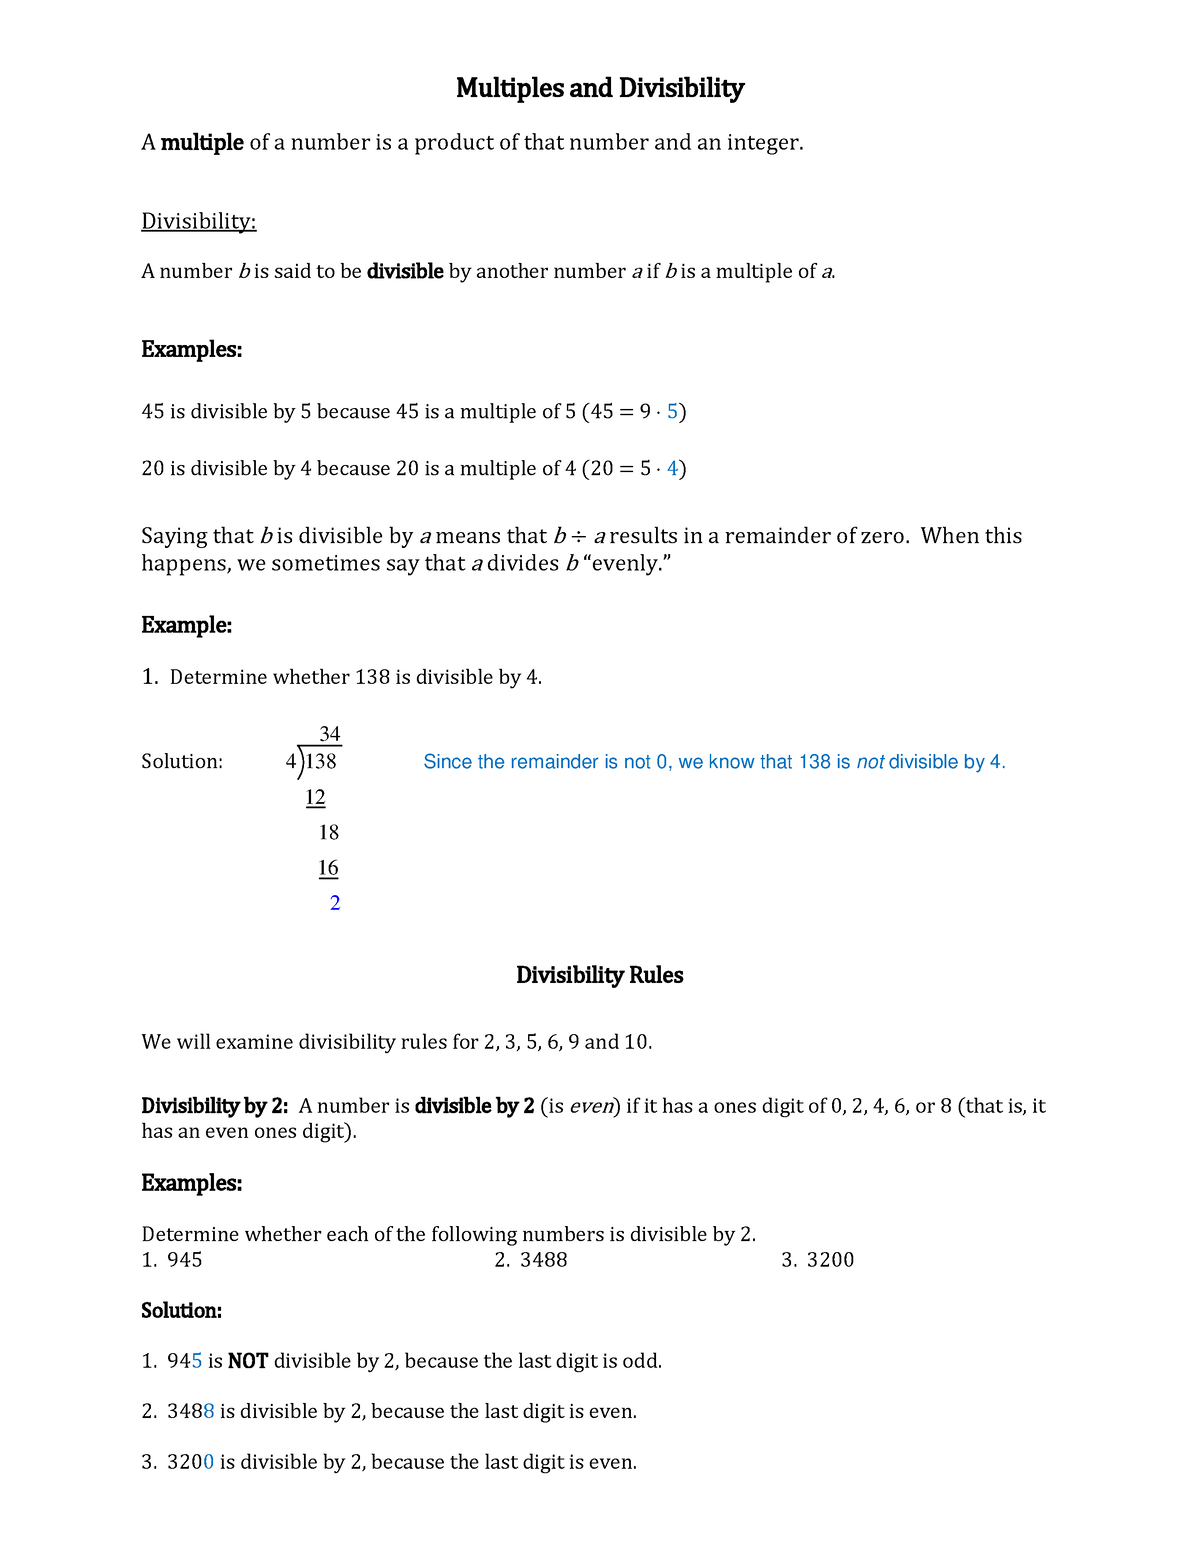 multiples-divisibility-primes-multiples-and-divisibility-a-multiple